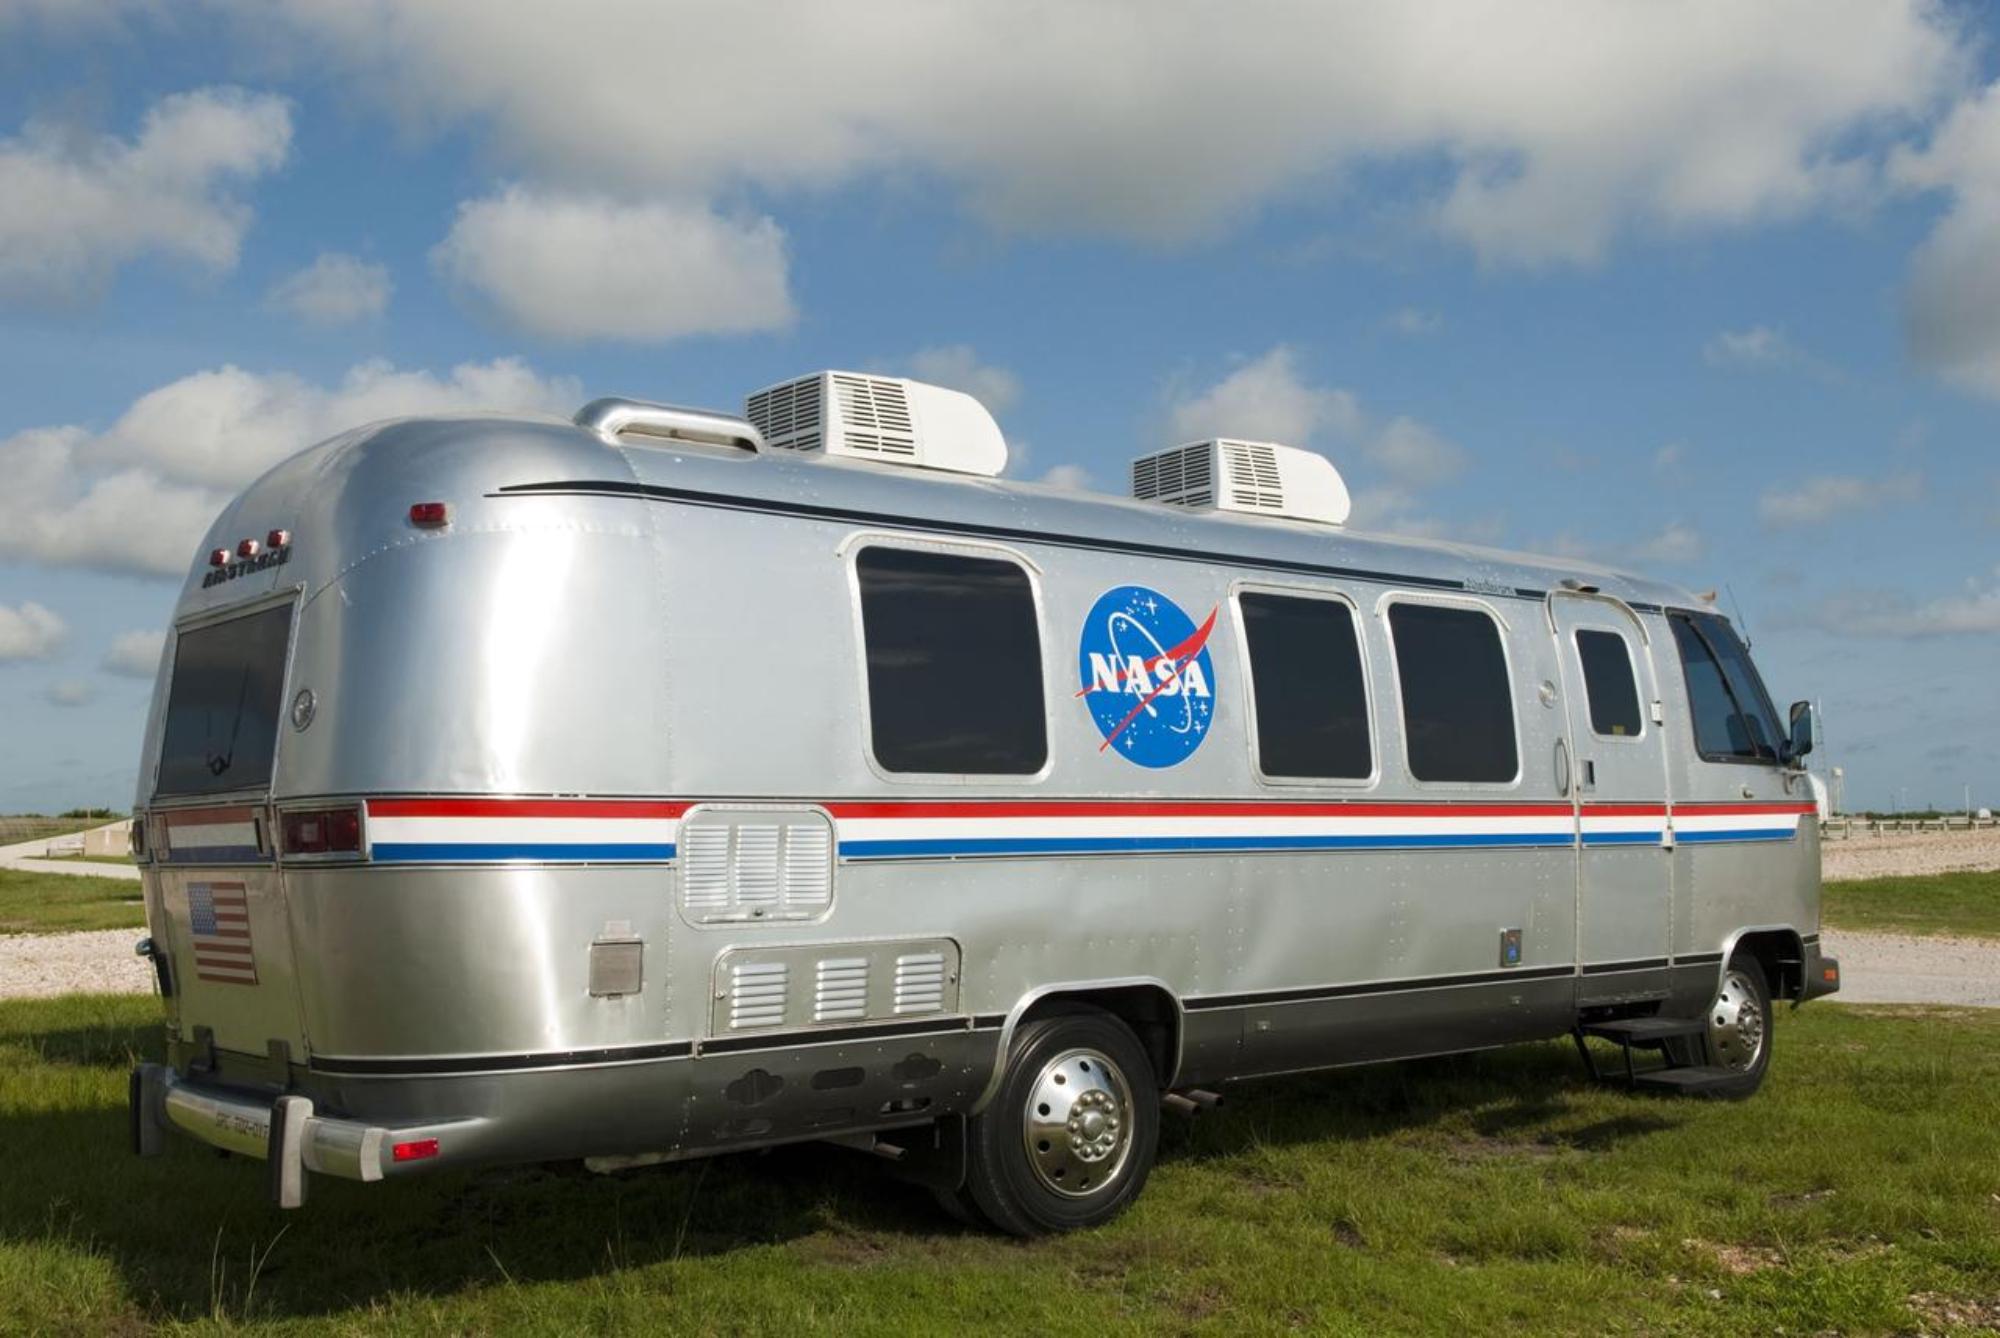 The Astrovan has been used to transport astronauts to the launch pad since 1984.